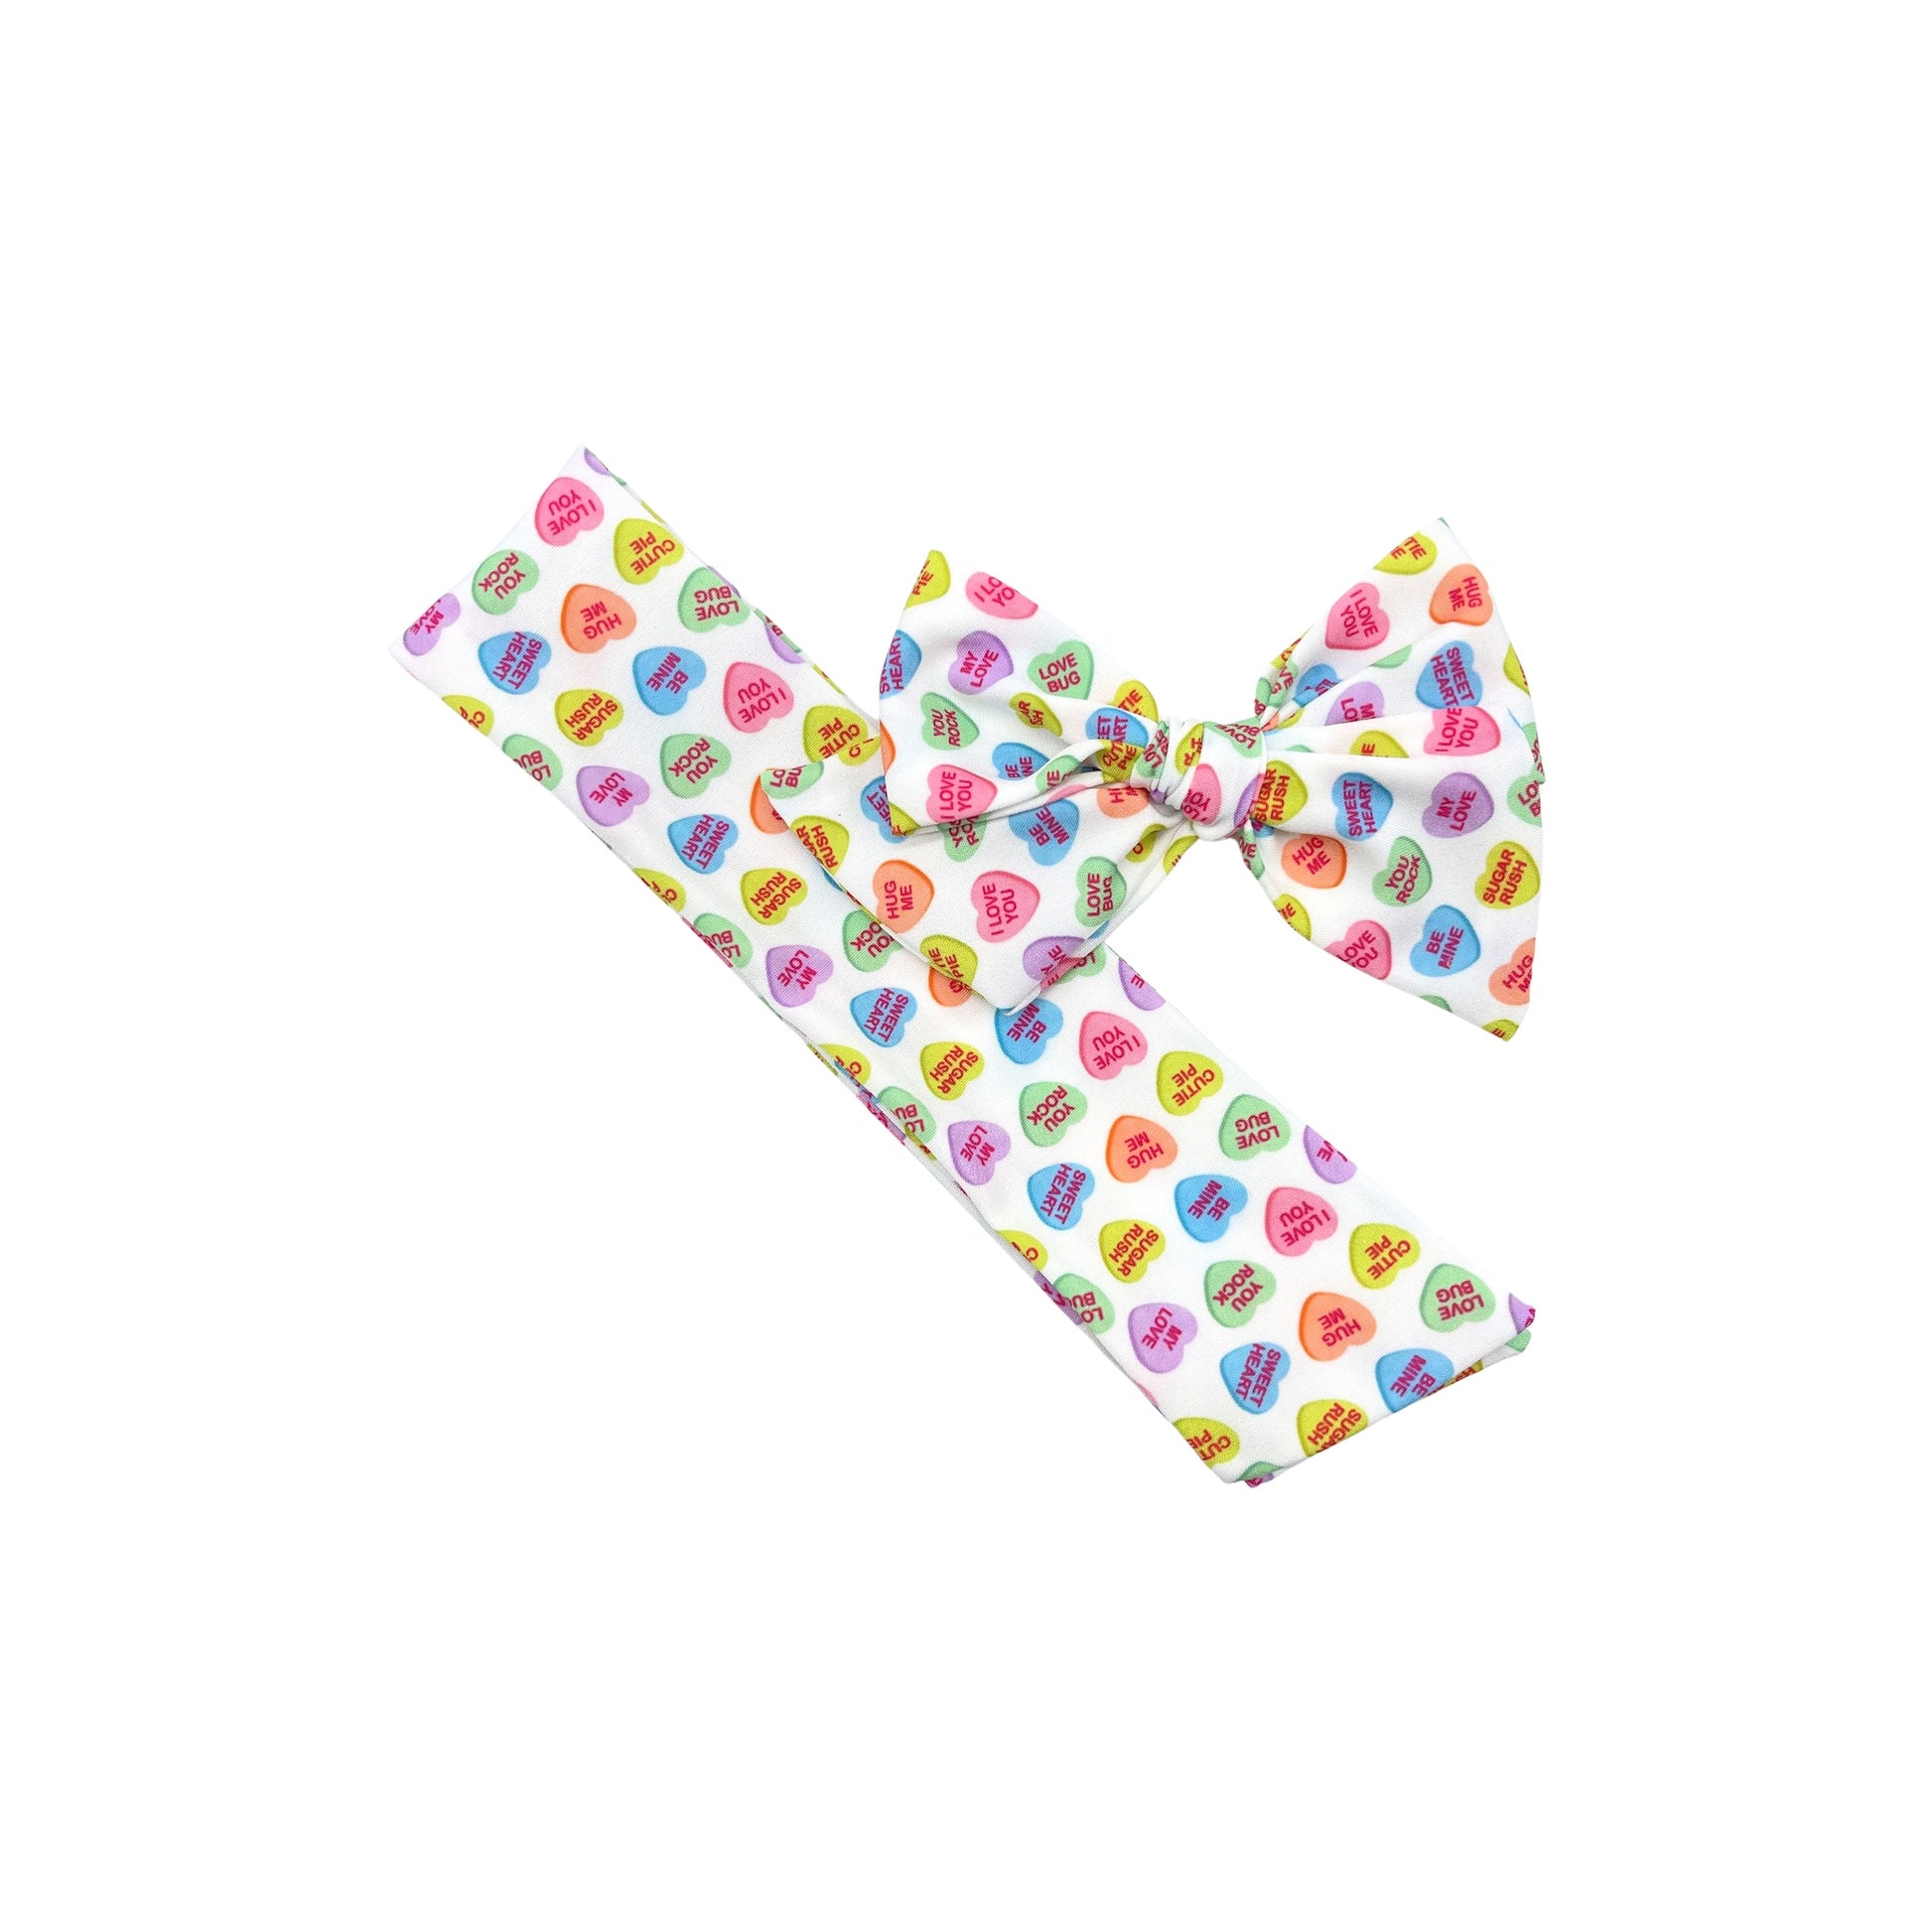 Tied and untied white Ruth style fabric bow strip with conversation heart pattern.